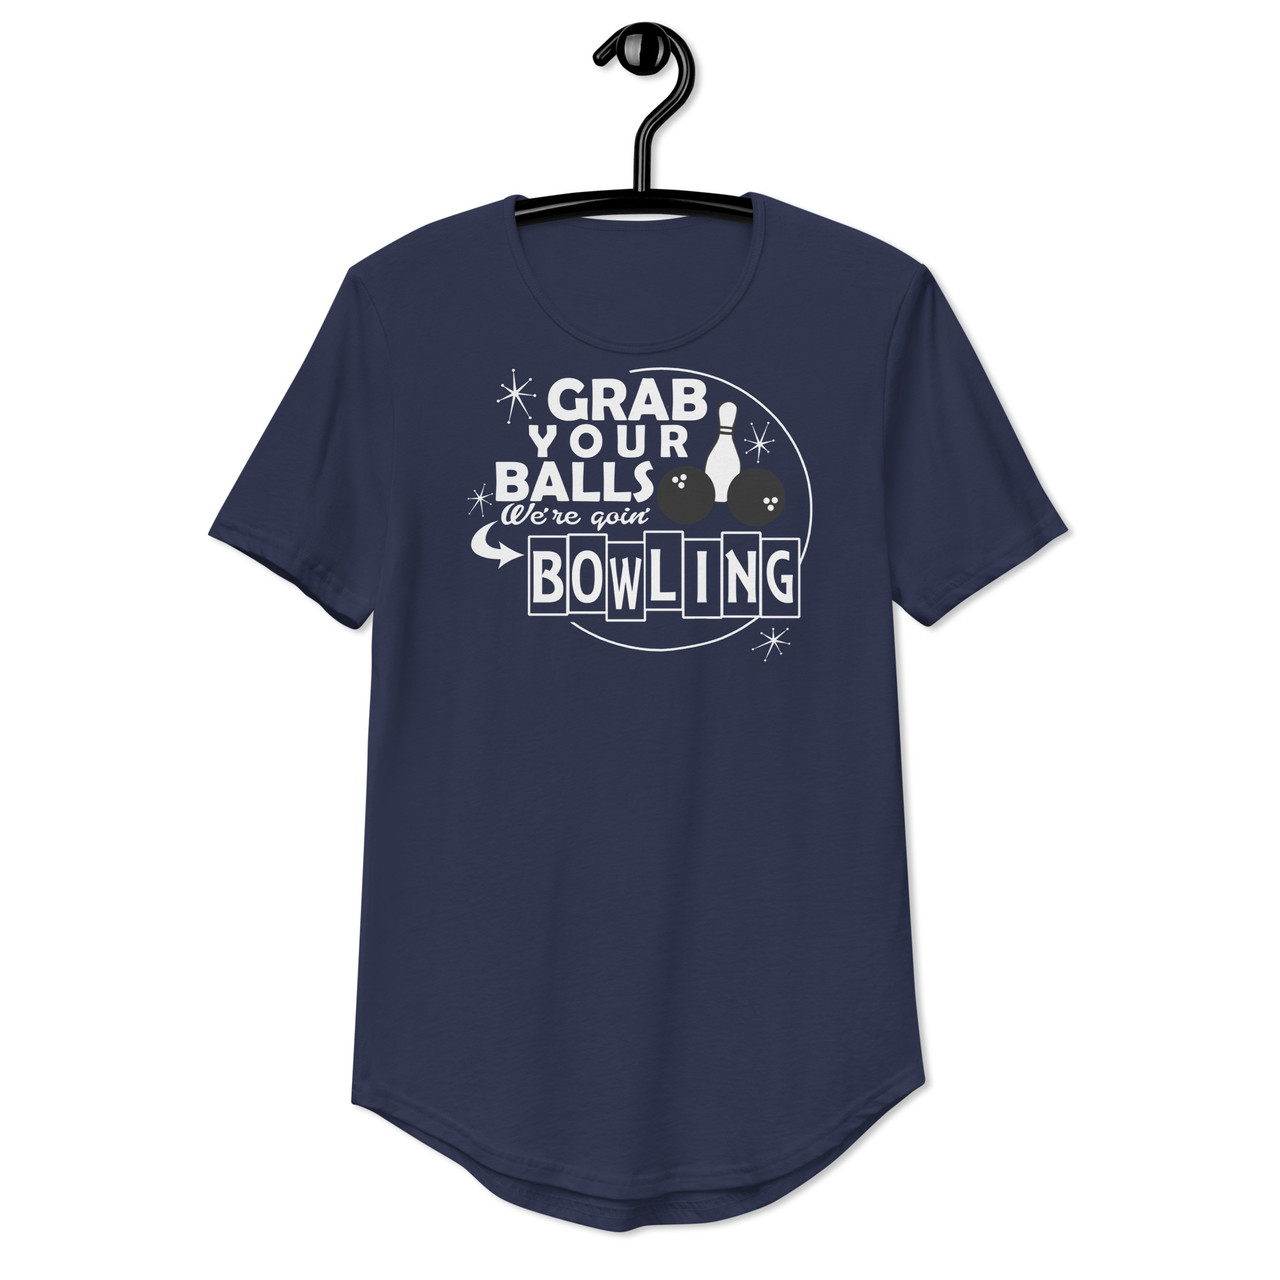 Grab Your Balls Were Going Bowling Curved Hem Tee - Bella + Canvas 3003 